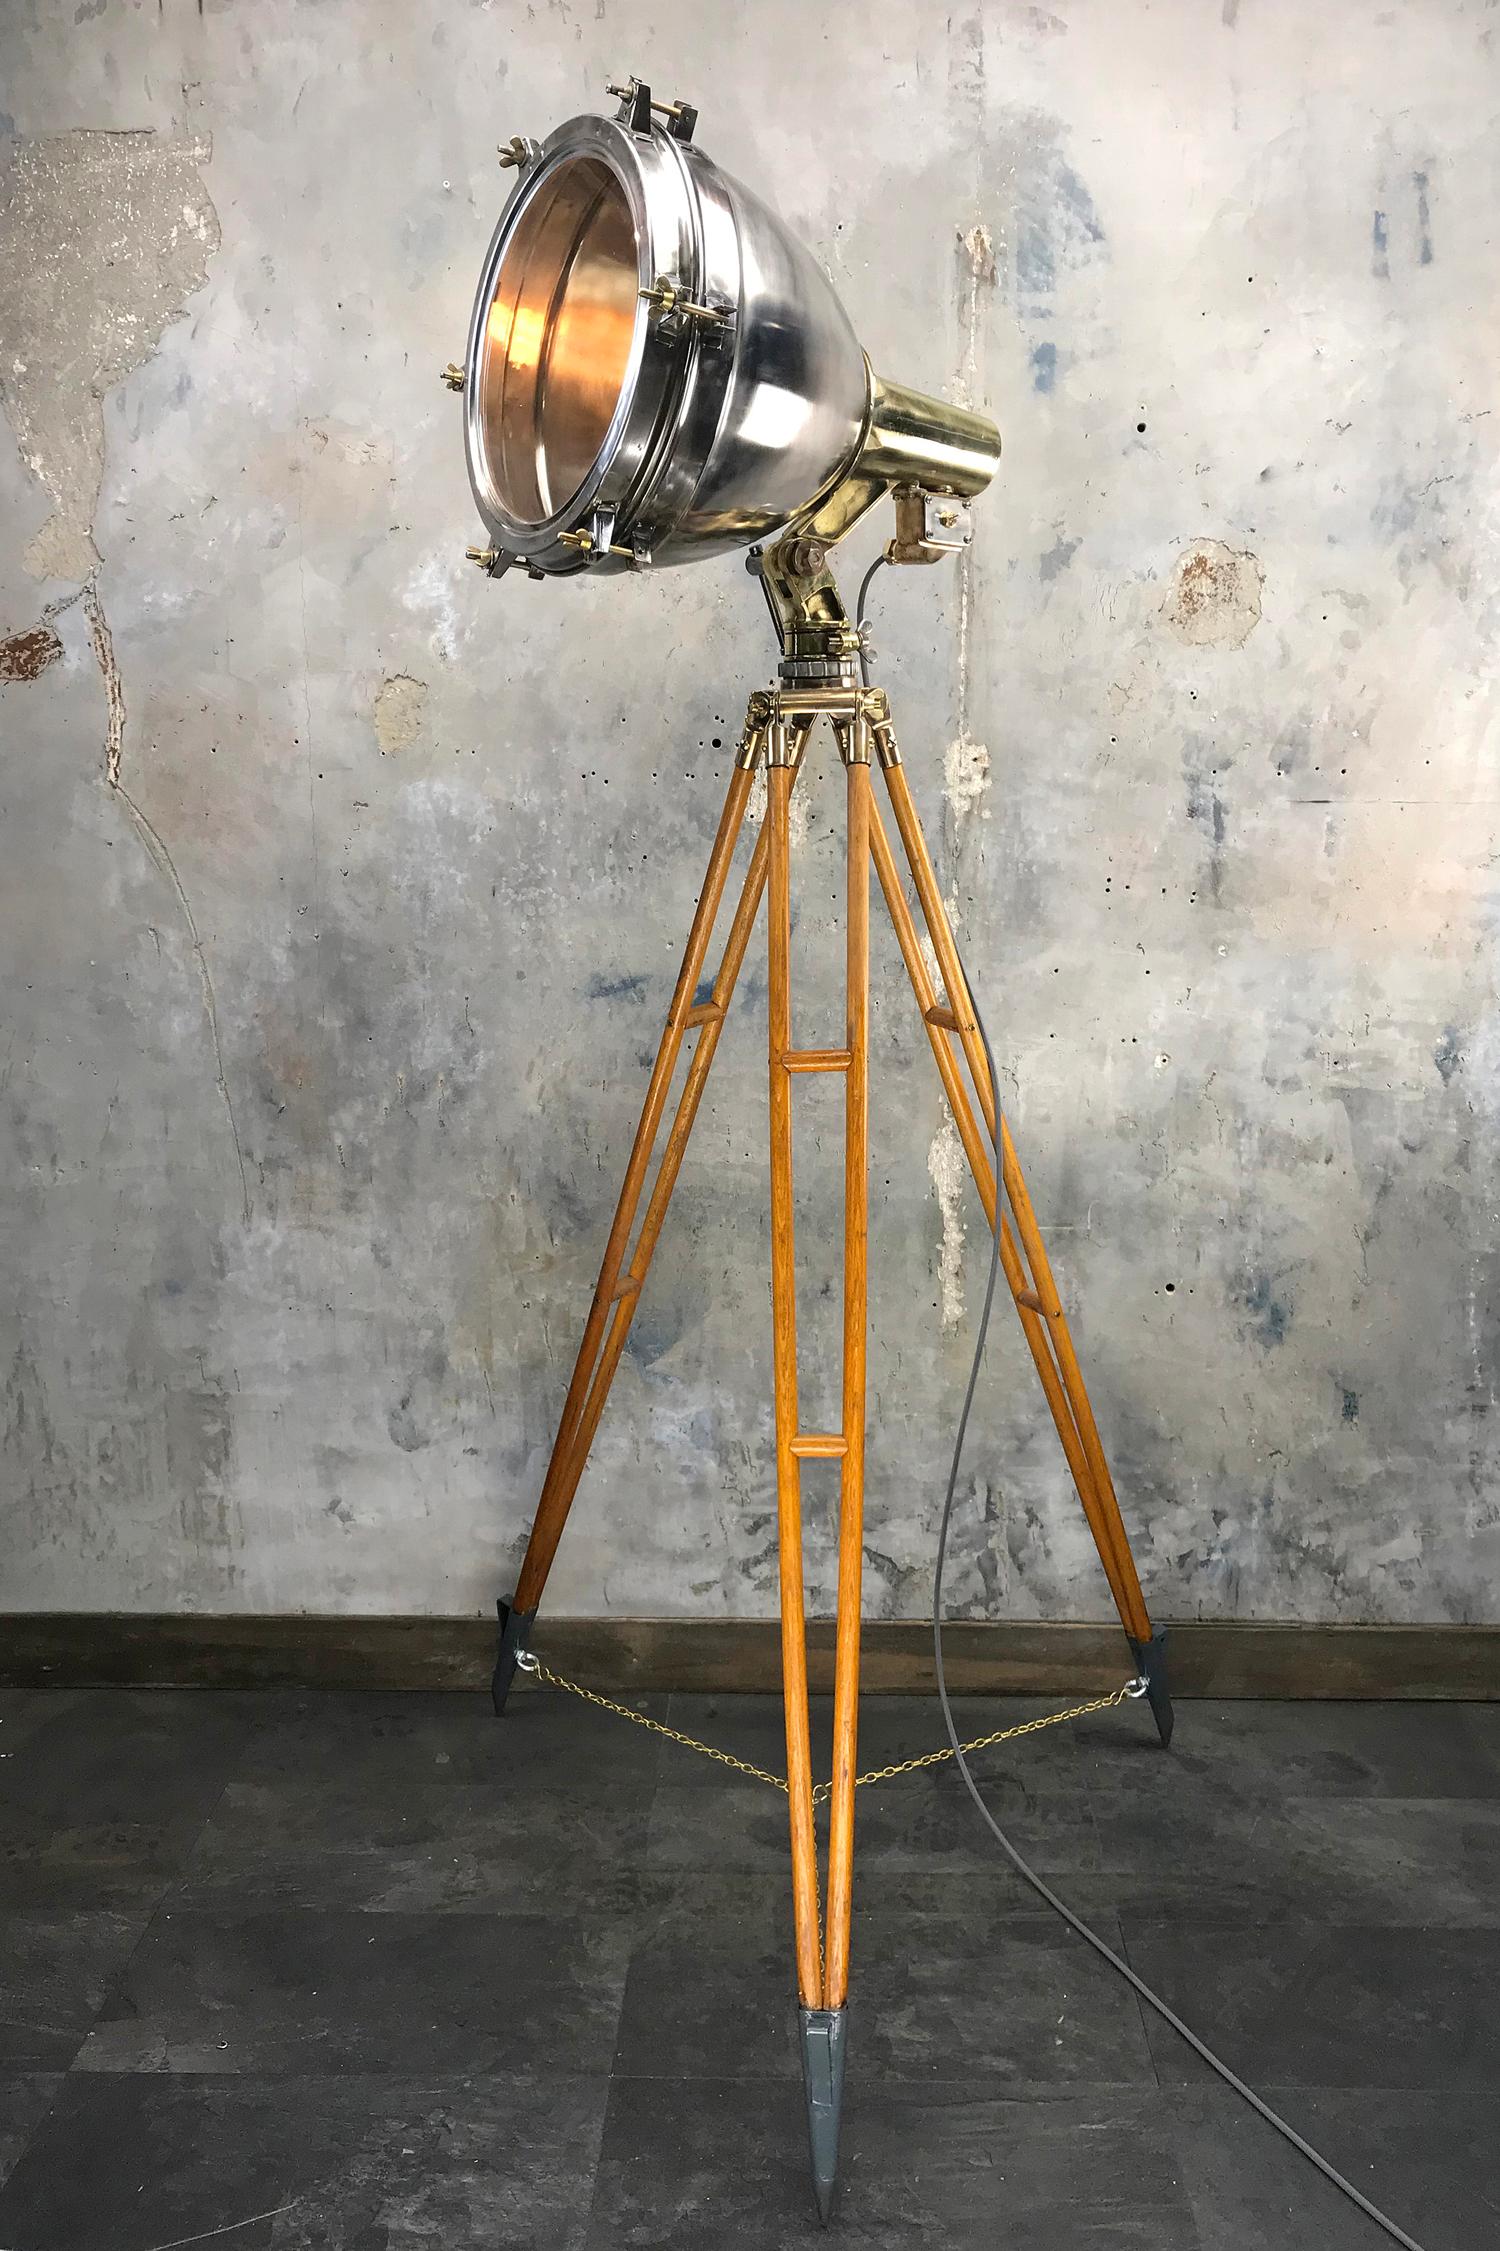 A statuesque vintage industrial floor lamp. The stainless steel and brass searchlight has been paired with a timber and bronze tripod to create a bespoke tall floor lamp 

Specifications: 
Width of Lamp: 52cm
Depth of Lamp: 60cm
Height: